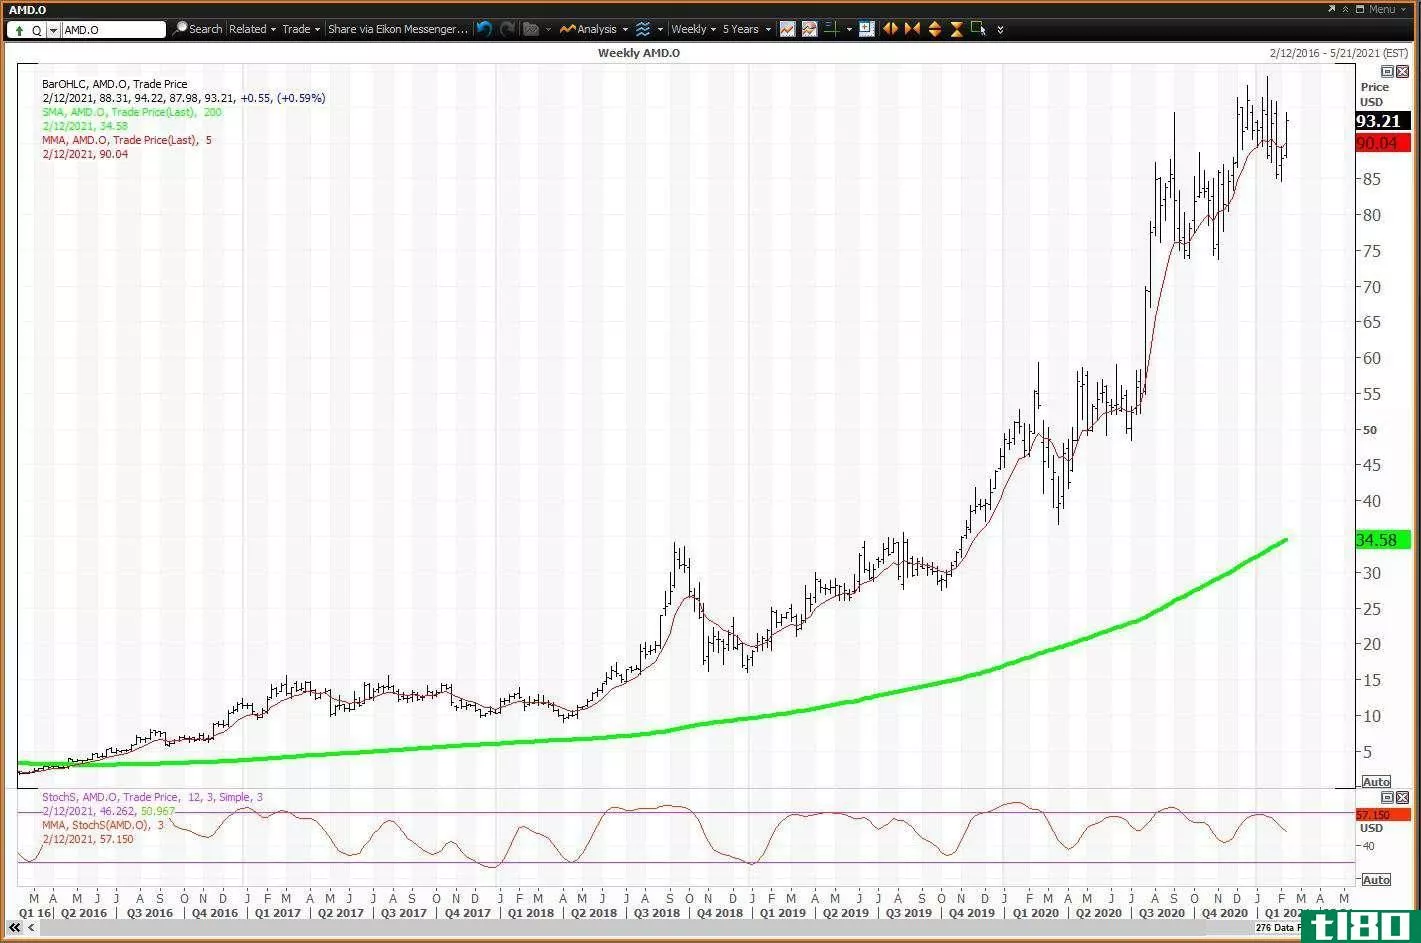 Weekly chart showing the share price performance of Advanced Micro Devices, Inc. (AMD)